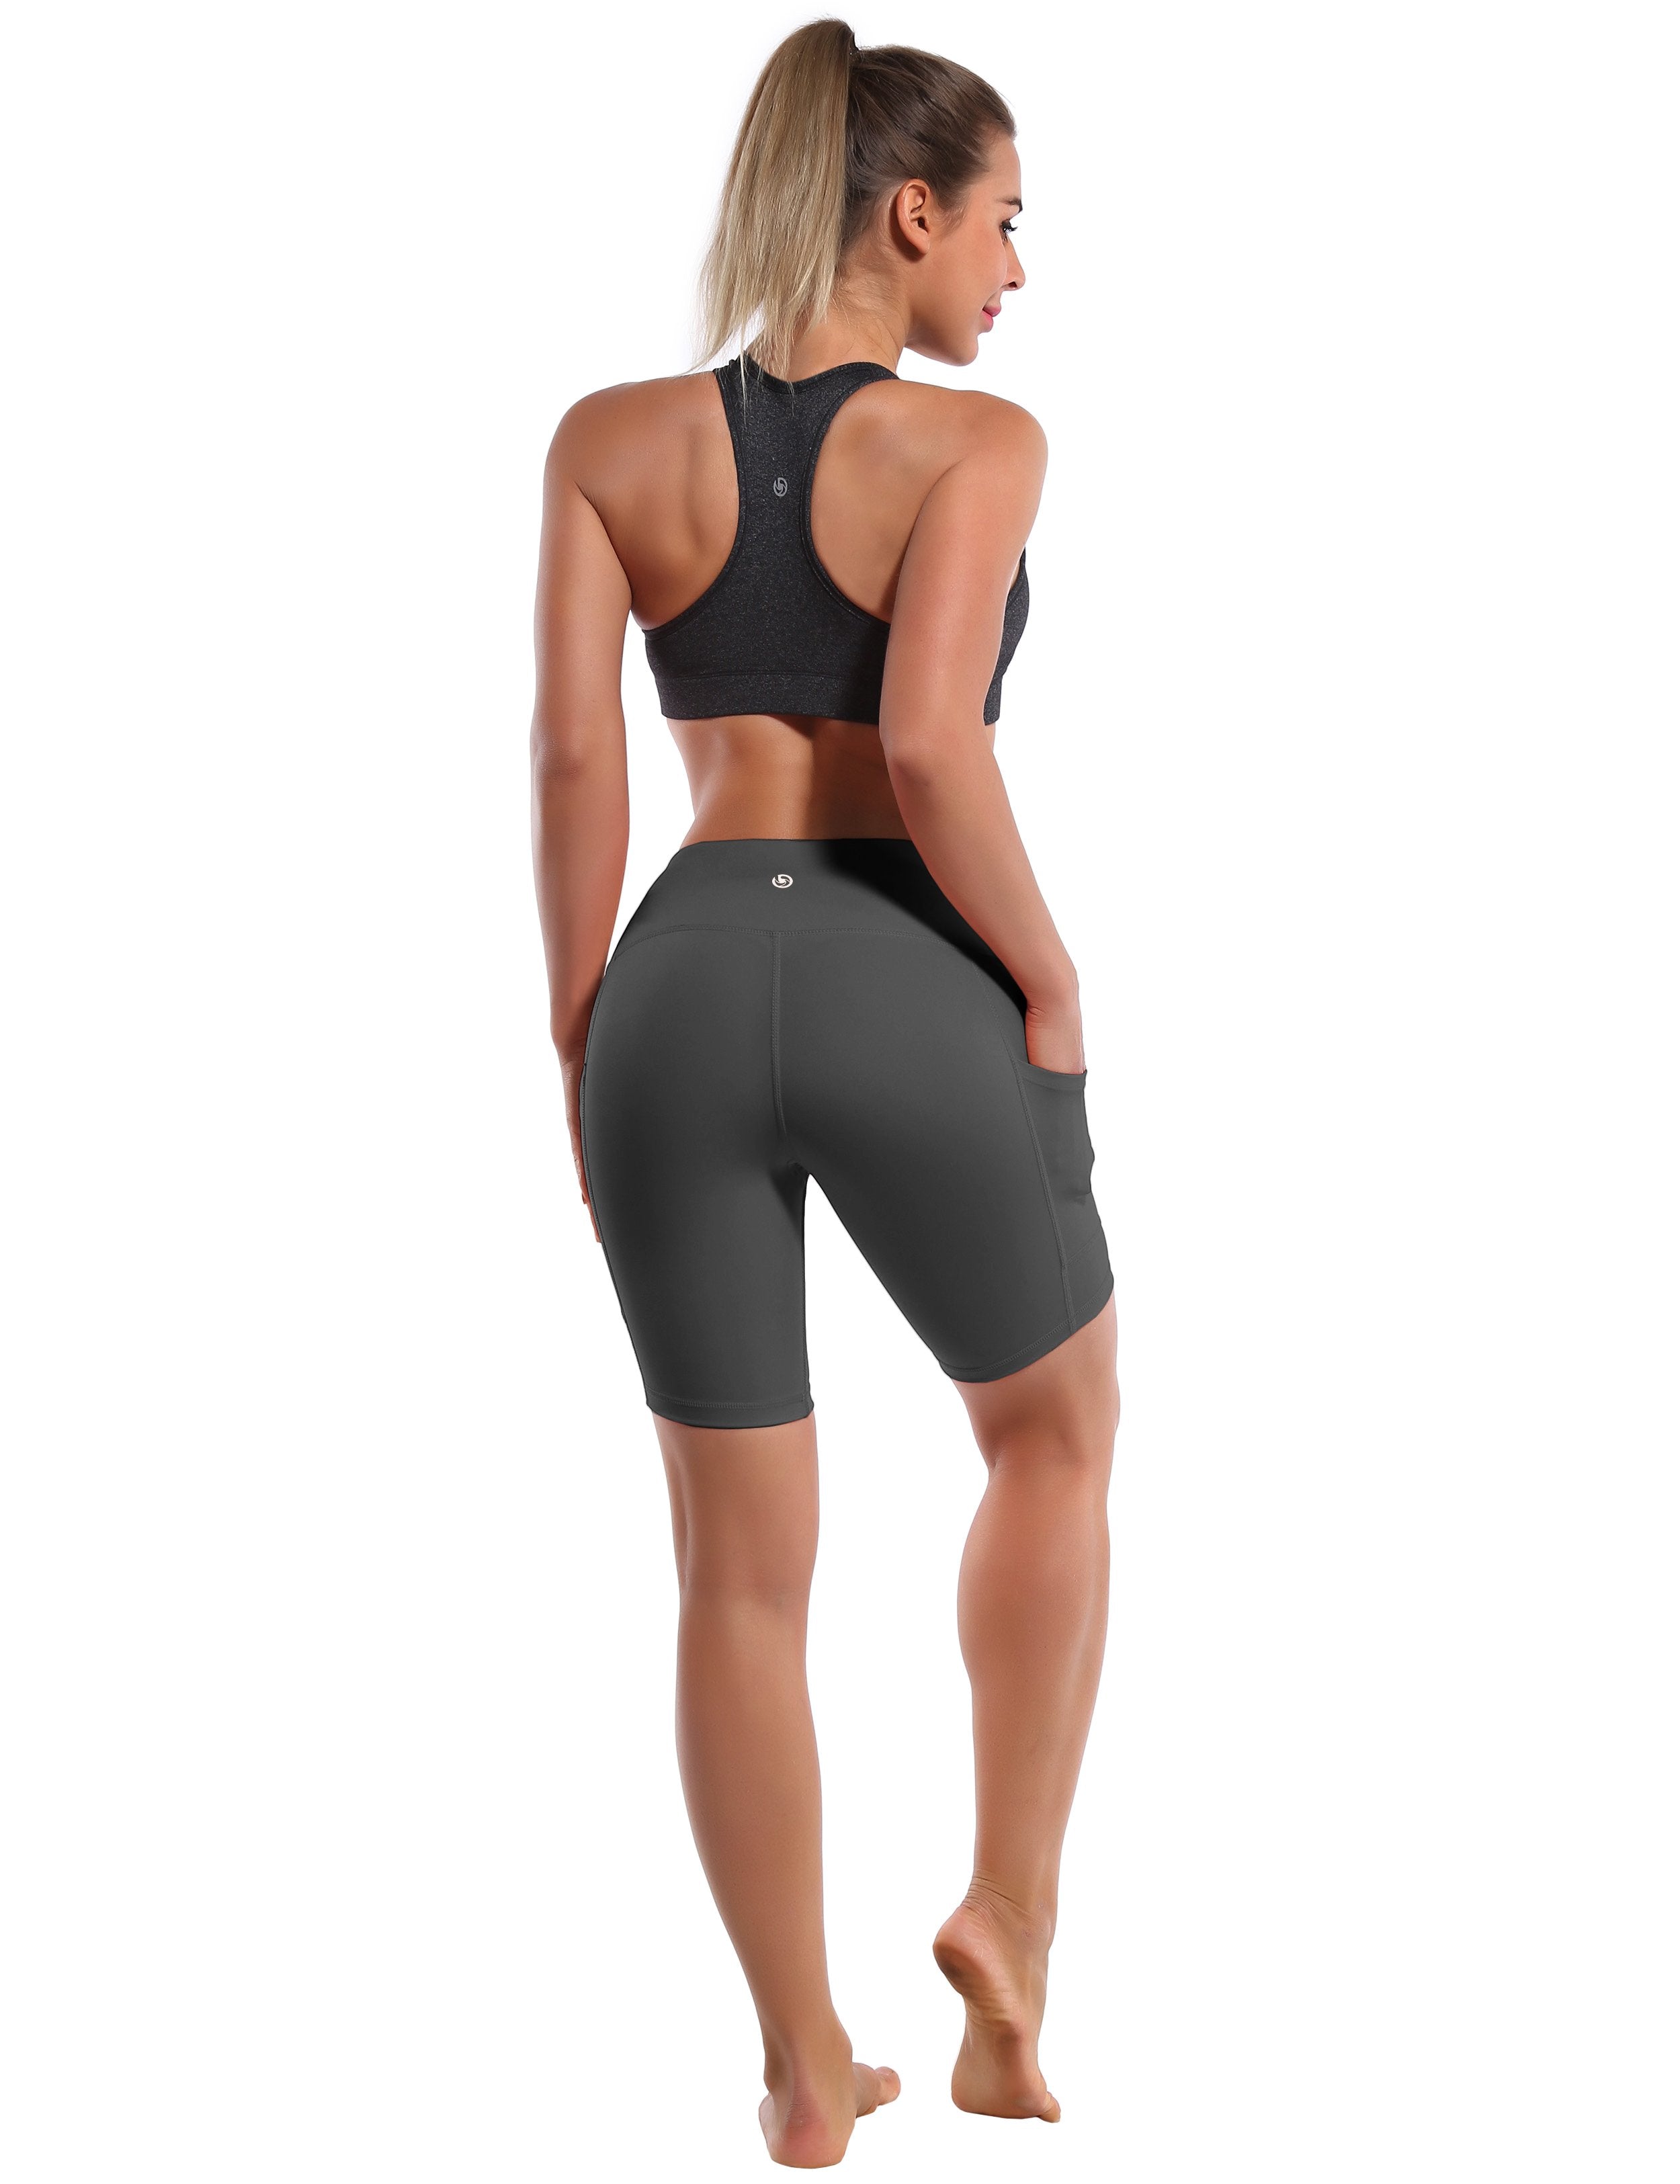 8" Side Pockets Yoga Shorts shadowcharcoal Sleek, soft, smooth and totally comfortable: our newest style is here. Softest-ever fabric High elasticity High density 4-way stretch Fabric doesn't attract lint easily No see-through Moisture-wicking Machine wash 75% Nylon, 25% Spandex